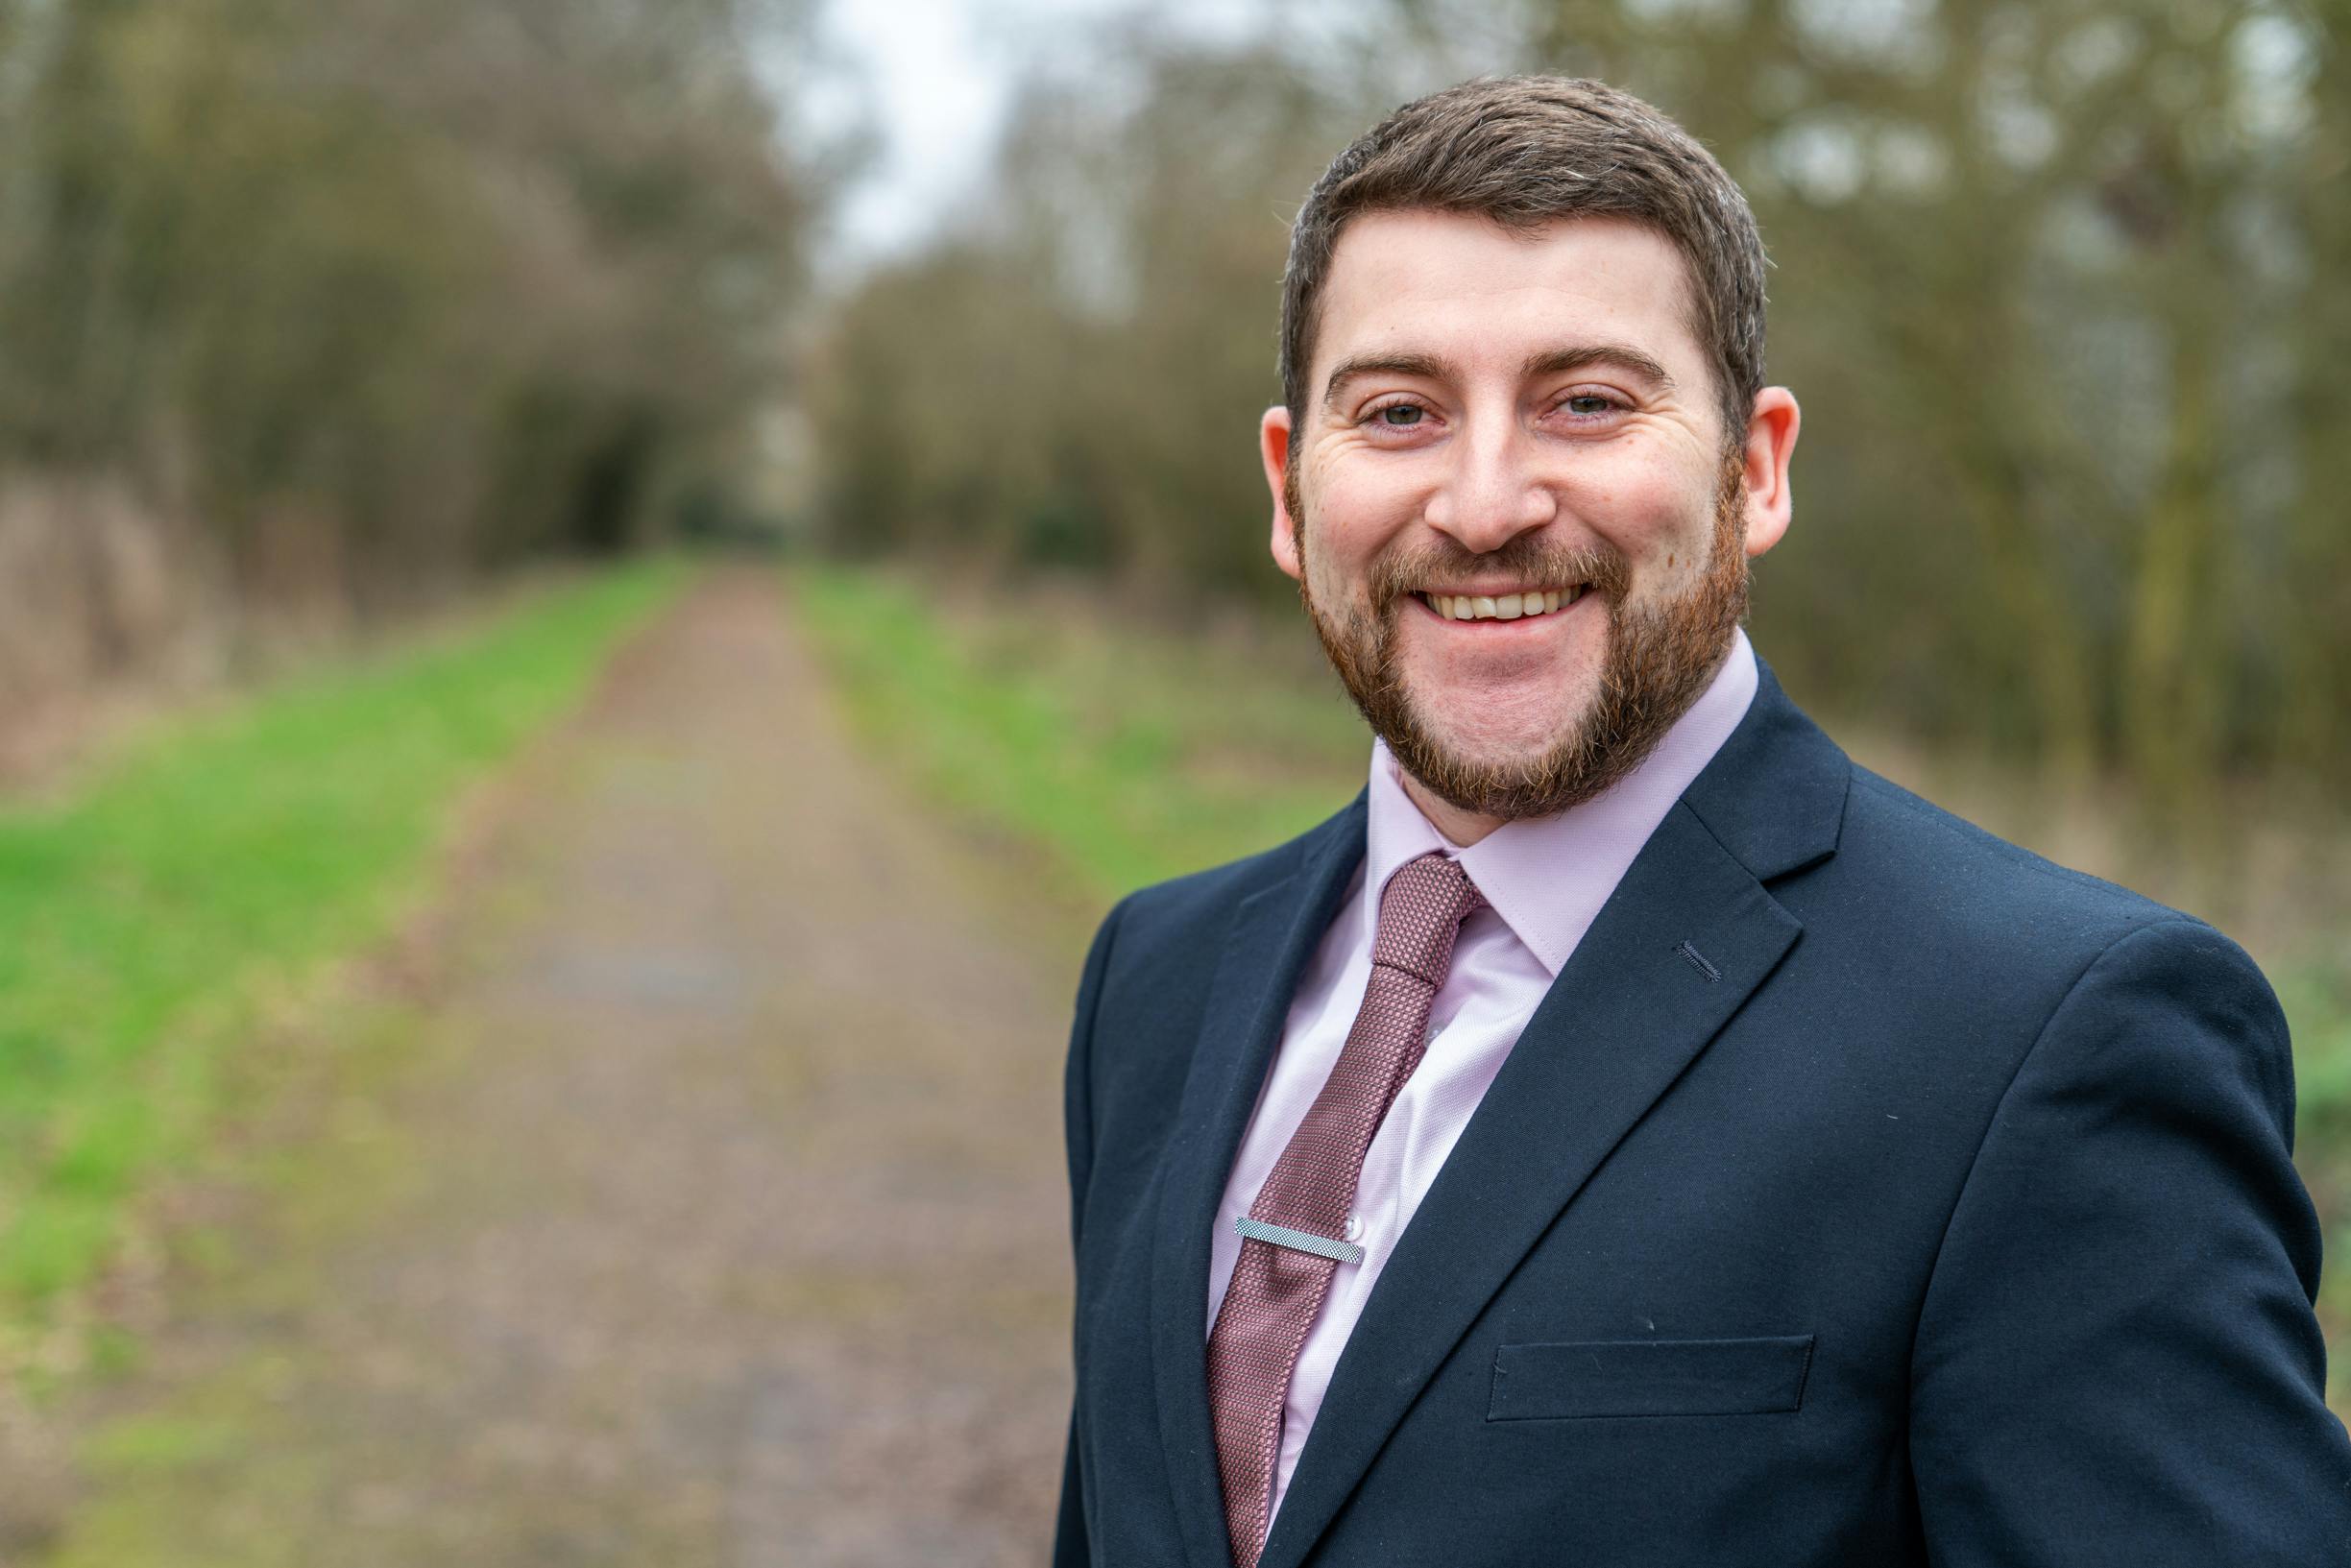 Kyle Smith, Manager for Lovewell Blake Accountants